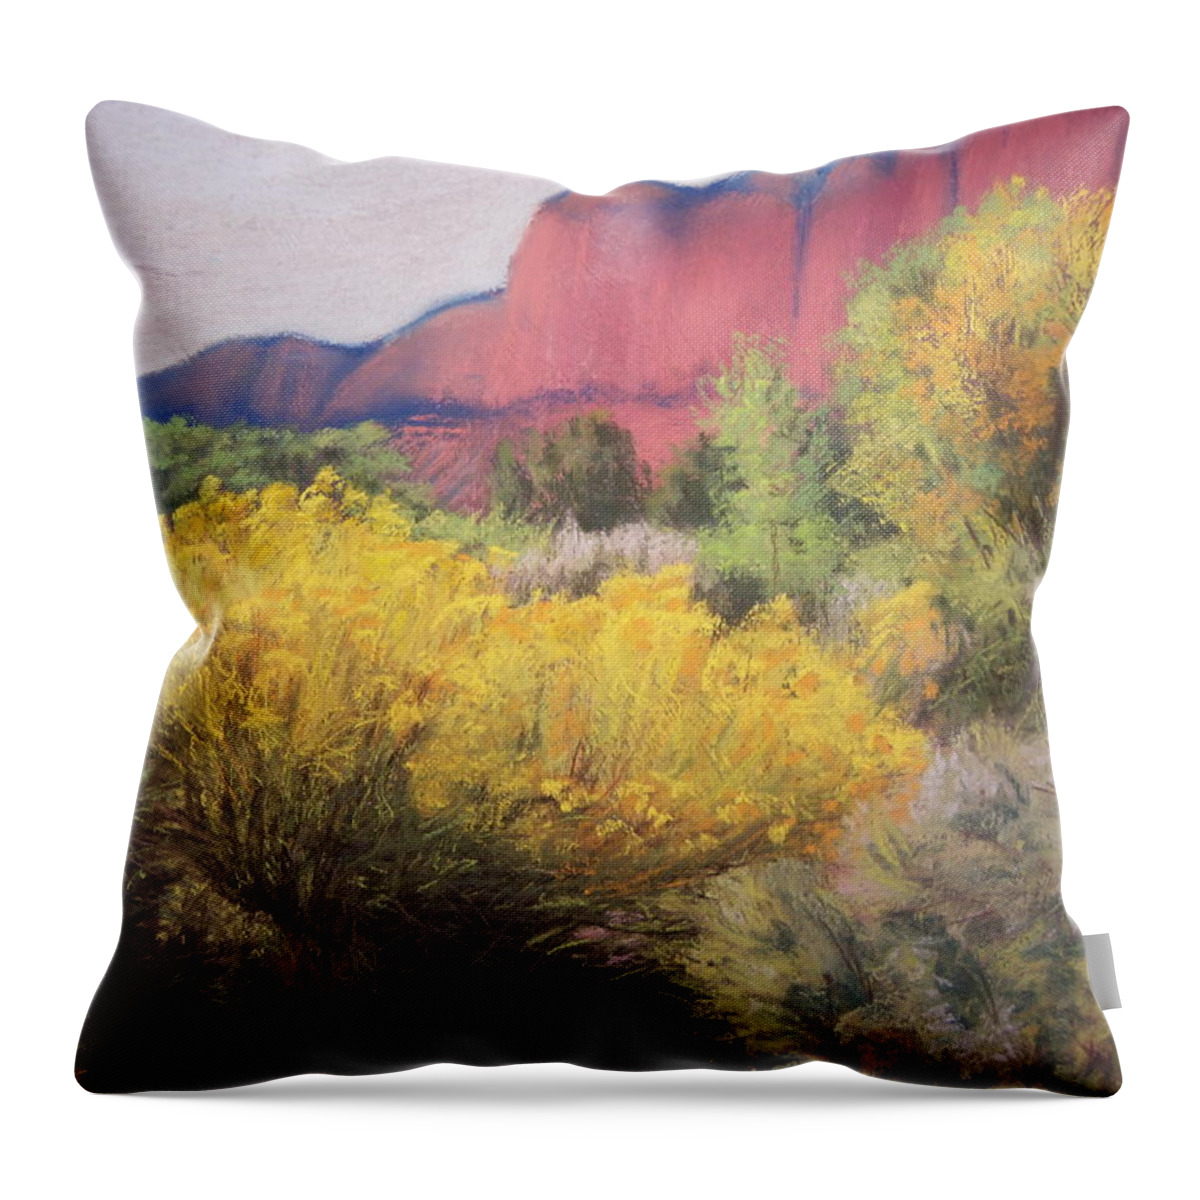 Landscape Throw Pillow featuring the painting Autumn Begins by Sandi Snead